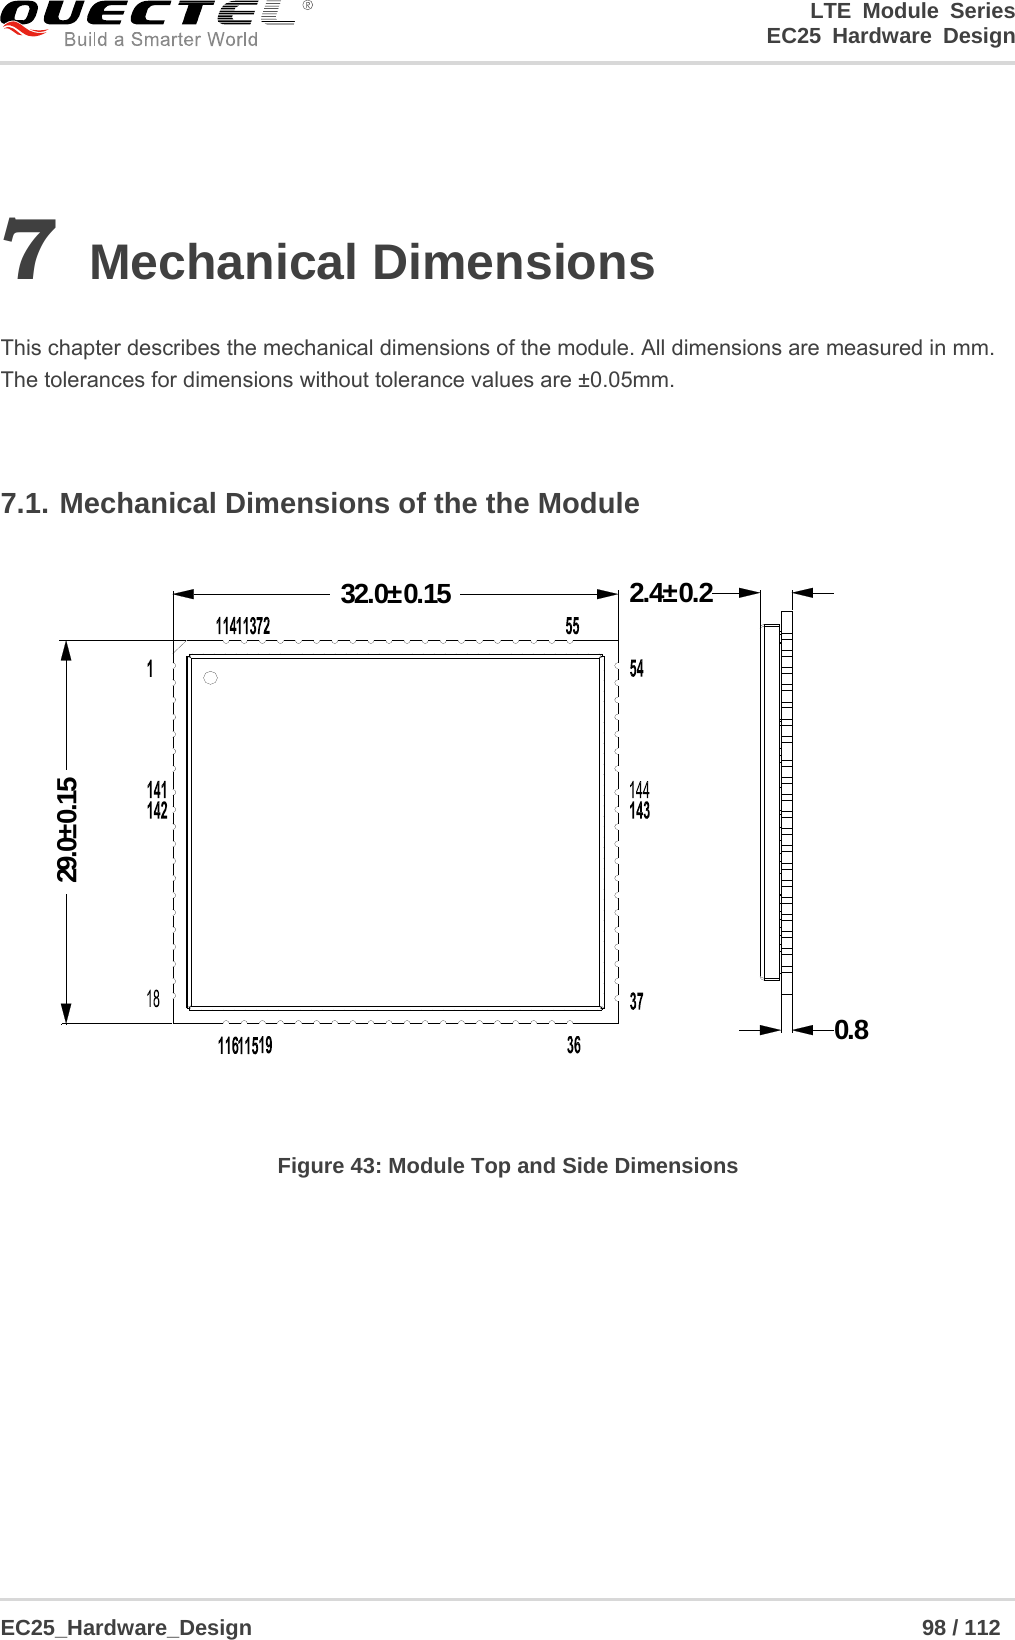 LTE Module Series                                                  EC25 Hardware Design  EC25_Hardware_Design                                                             98 / 112    7 Mechanical Dimensions  This chapter describes the mechanical dimensions of the module. All dimensions are measured in mm. The tolerances for dimensions without tolerance values are ±0.05mm.  7.1. Mechanical Dimensions of the the Module 32.0±0.1529.0±0.150.82.4±0.2 Figure 43: Module Top and Side Dimensions  